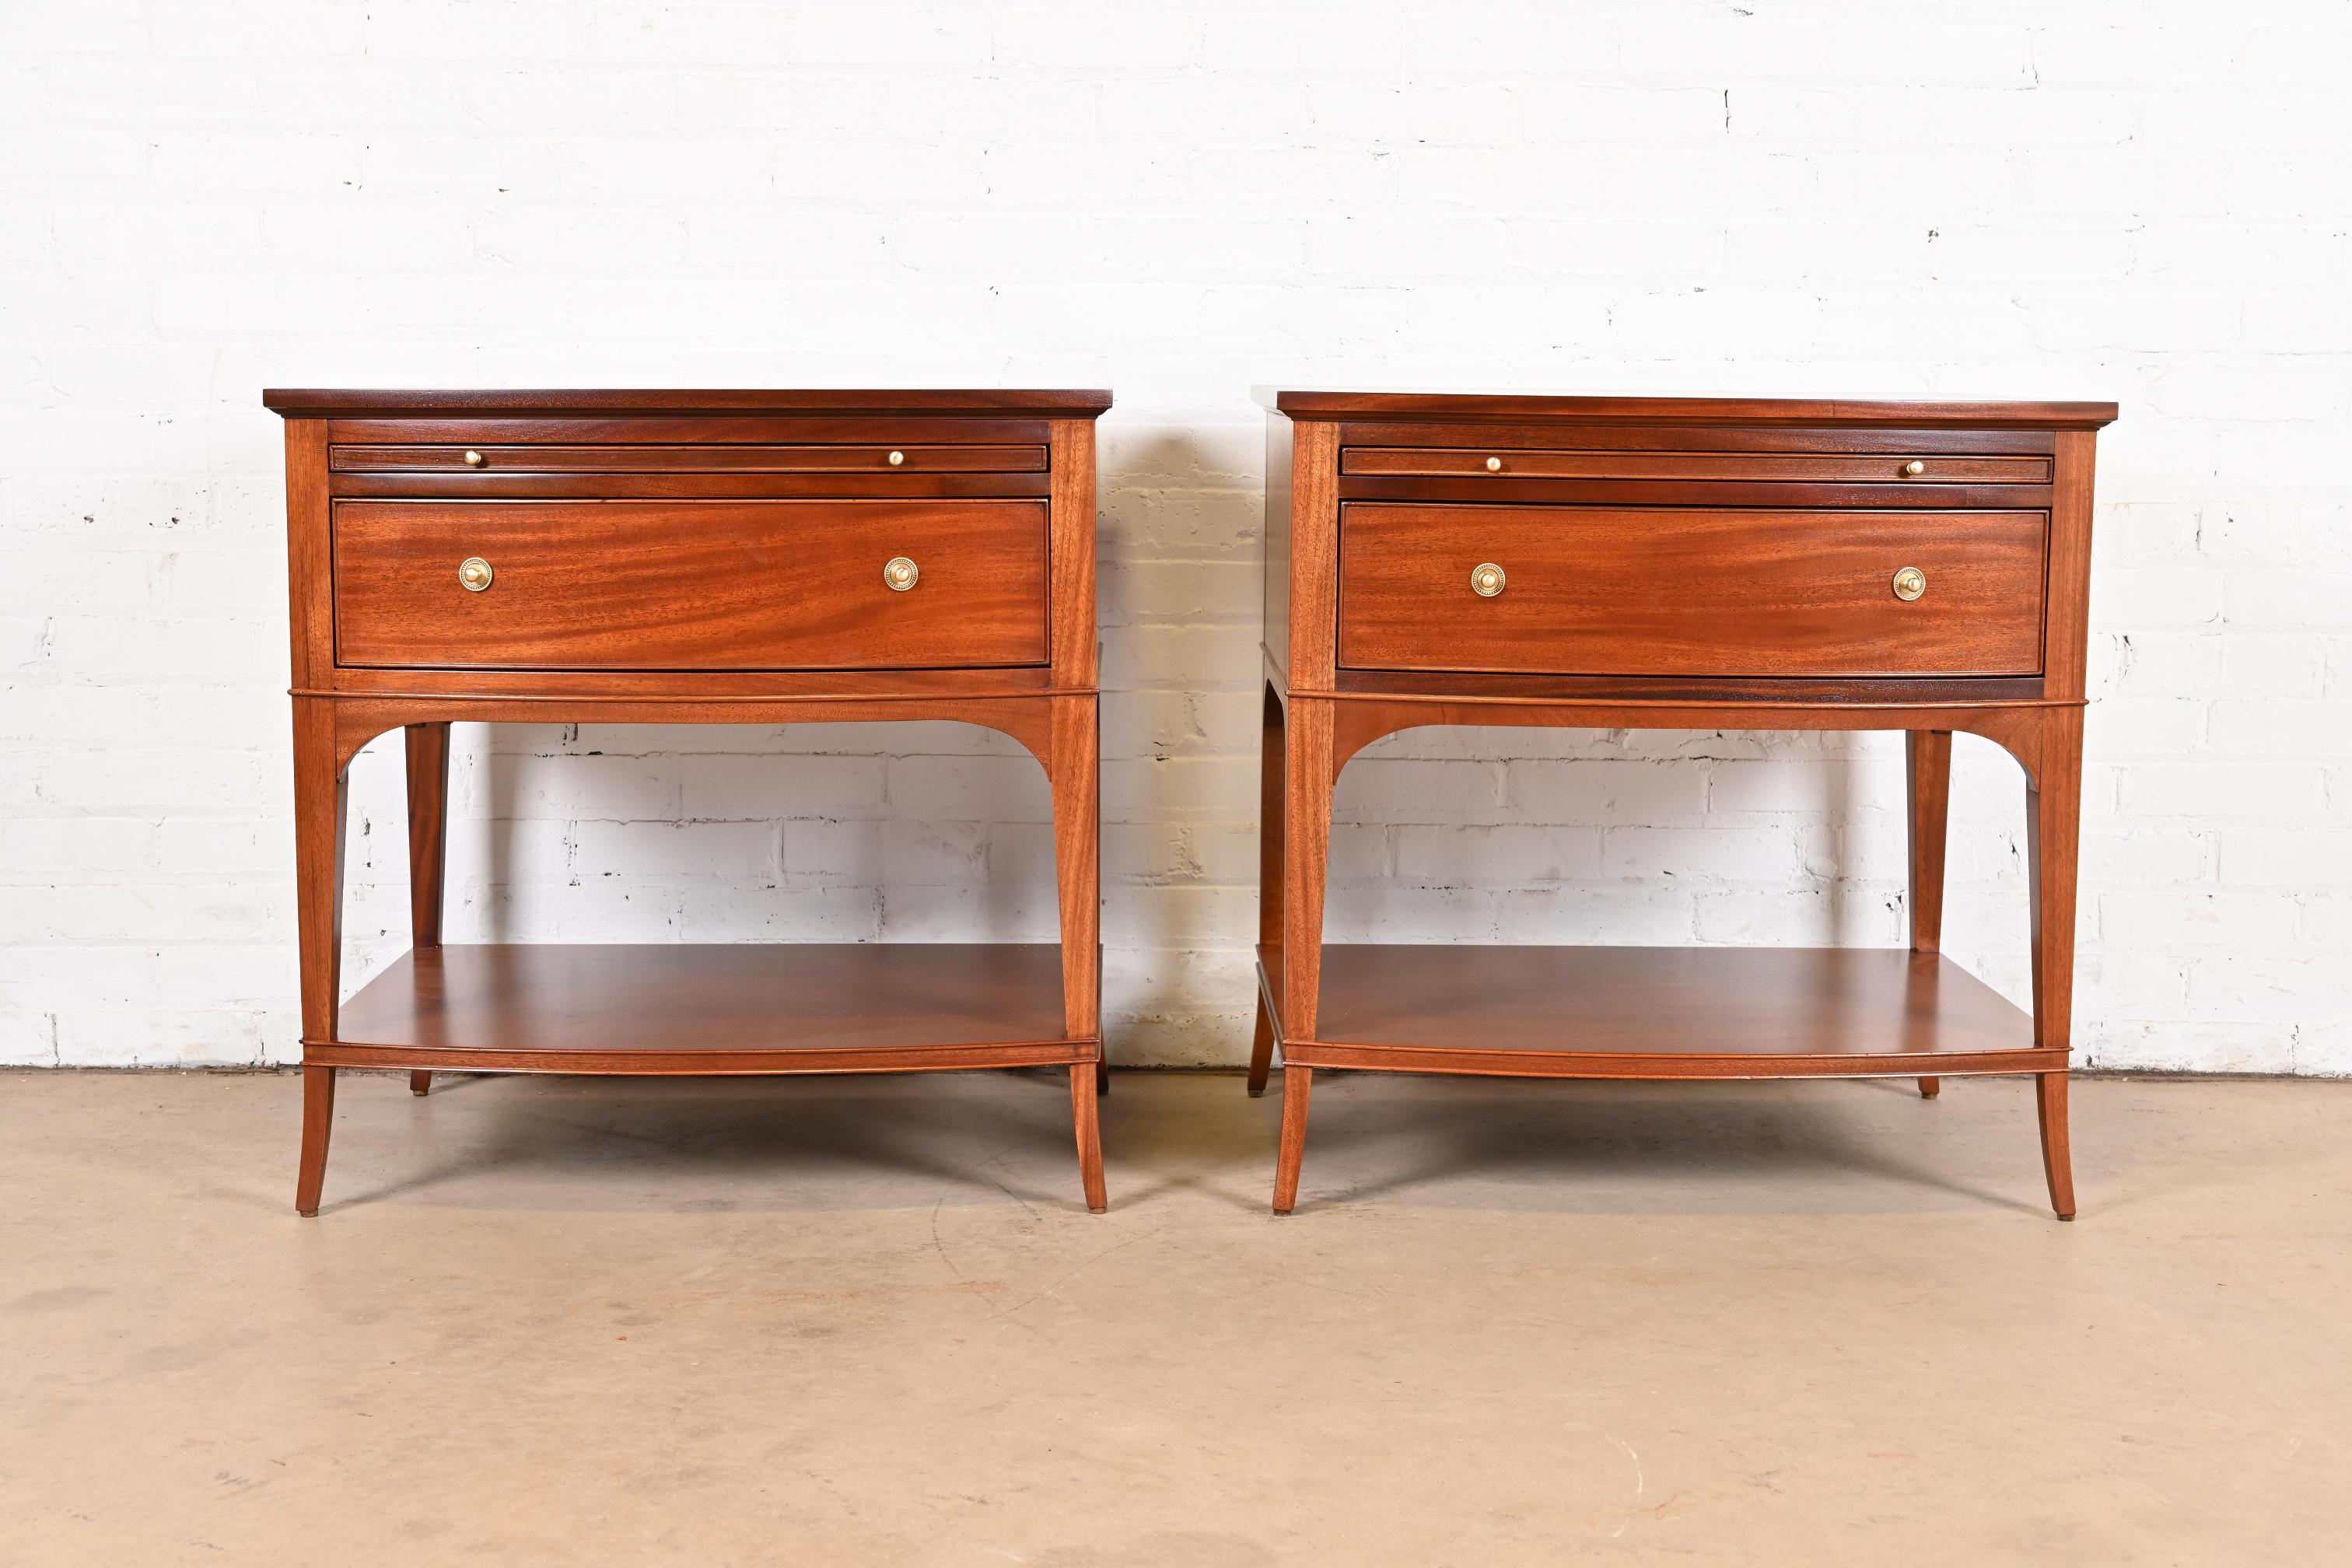 20th Century Baker Furniture Regency Mahogany Bedside Tables, Newly Refinished